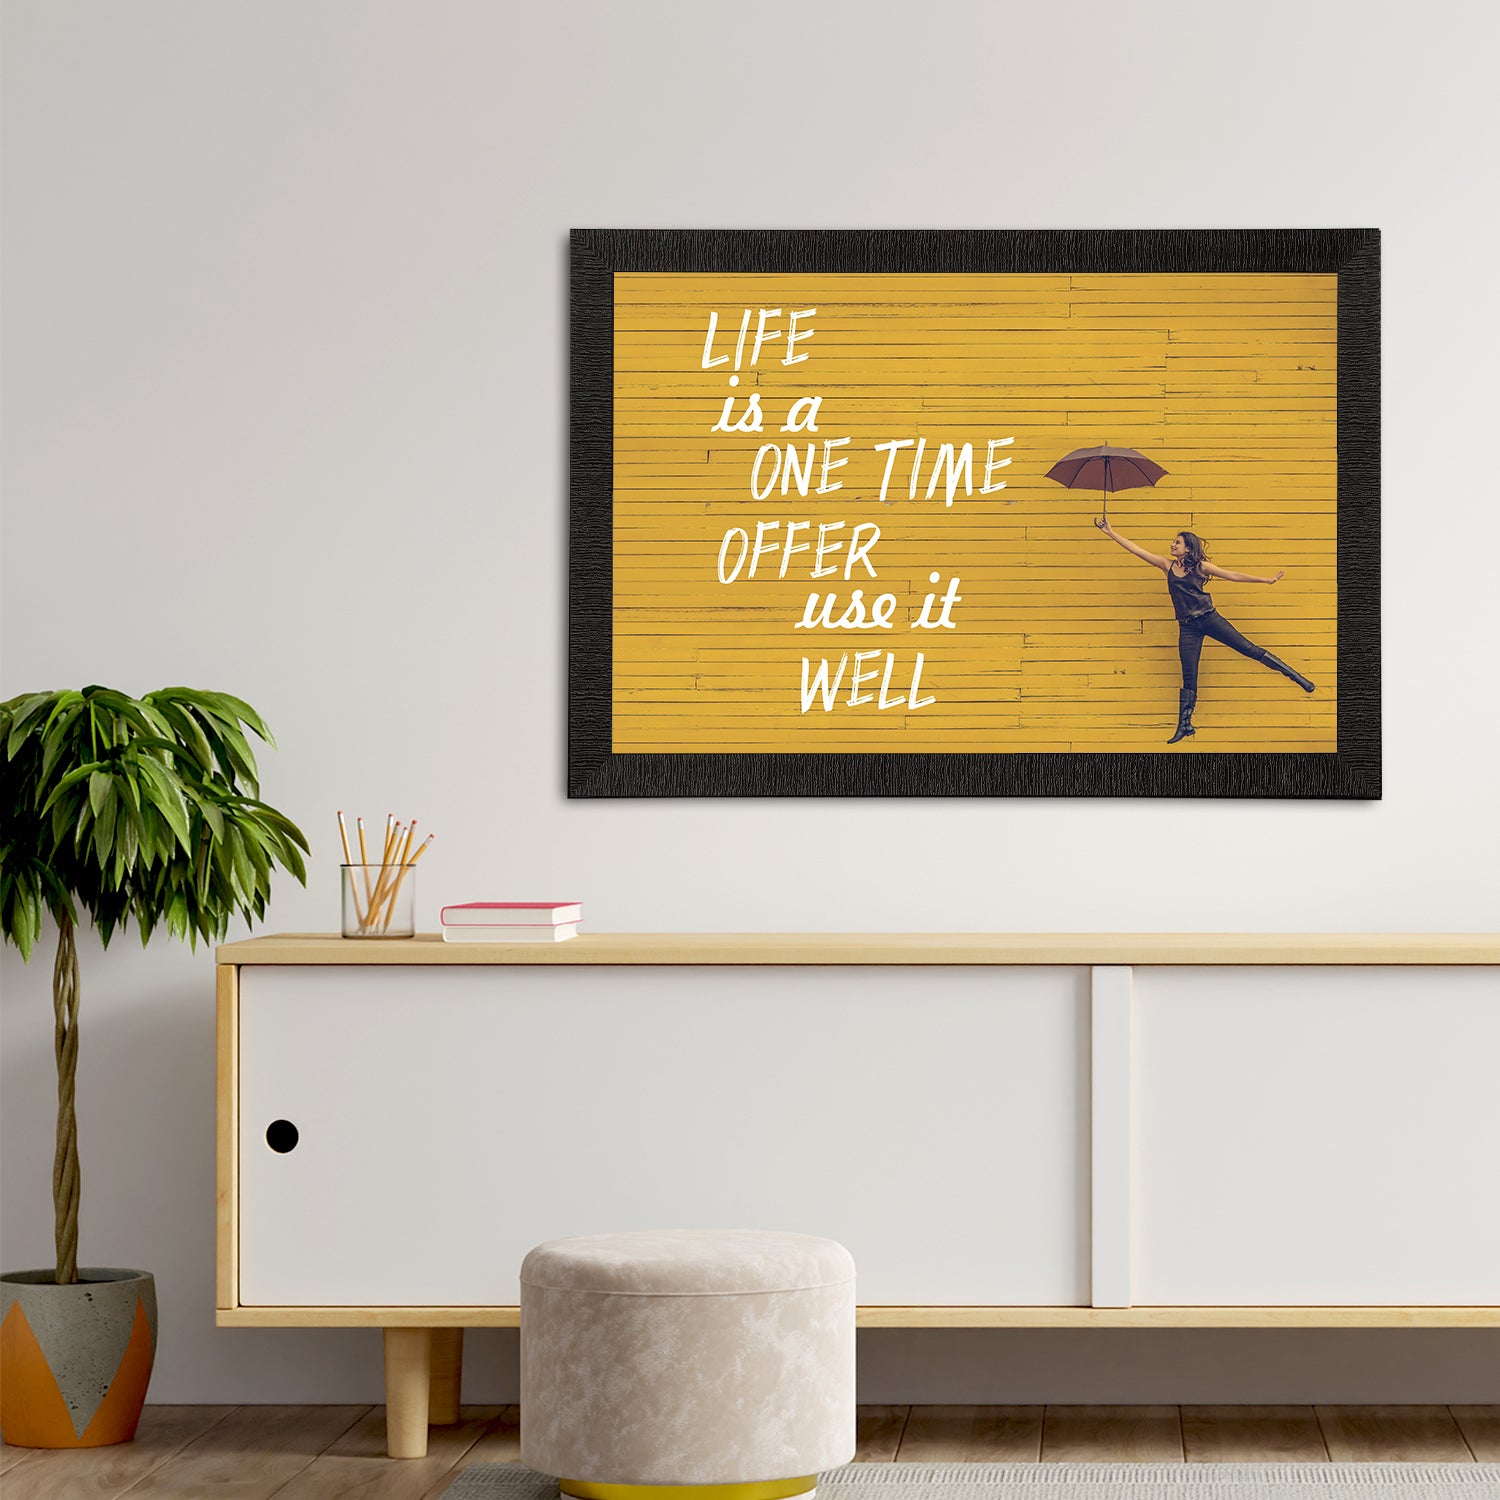 "Life Is A One Time Offer Use It Well" Motivational Quote Satin Matt Texture UV Art Painting 2